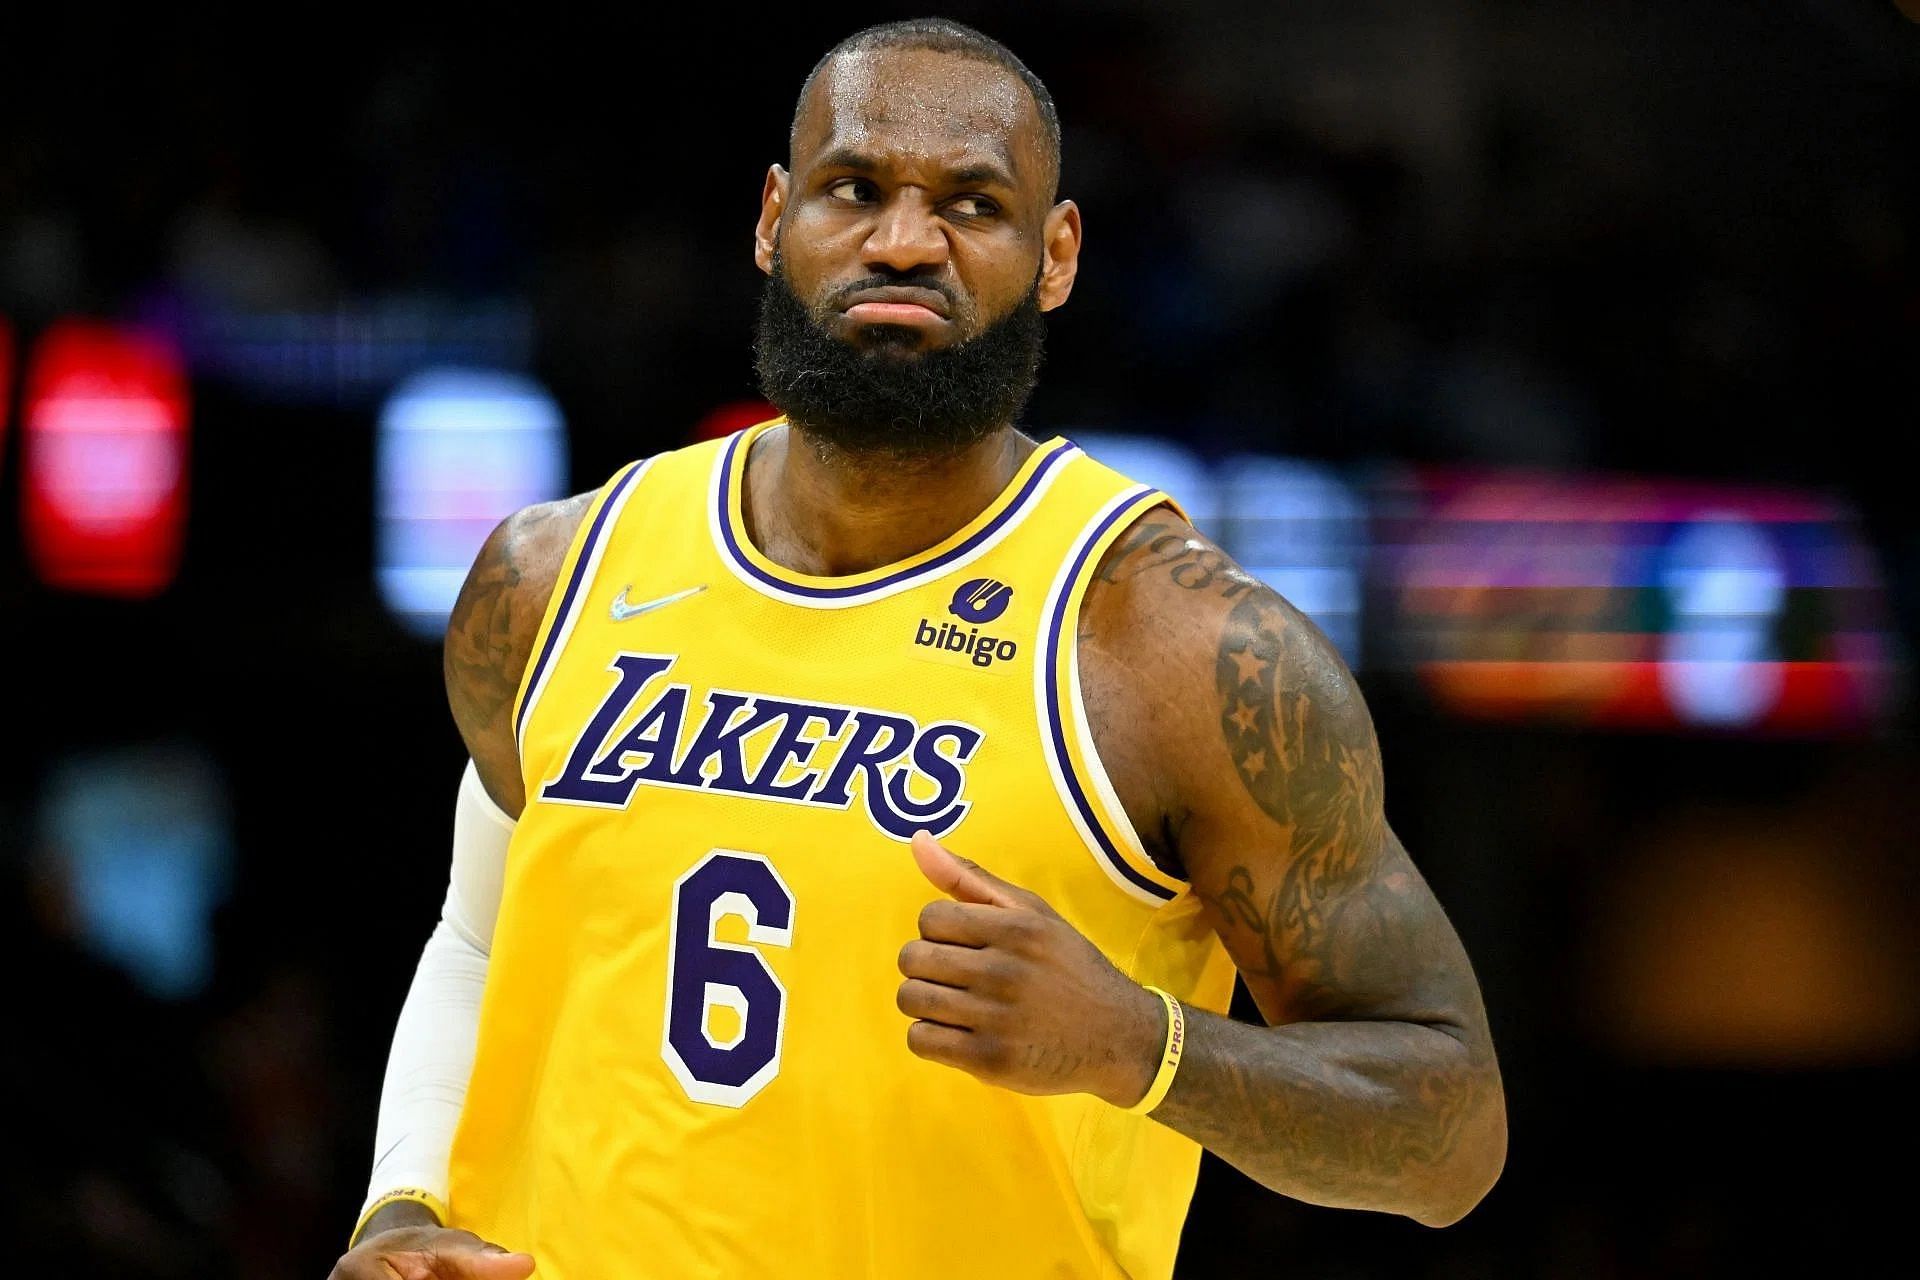 ESPN: Early dck riding: Fans roast ESPN for sharing video of LeBron James  eating sushi during Lakers-Warriors preseason game